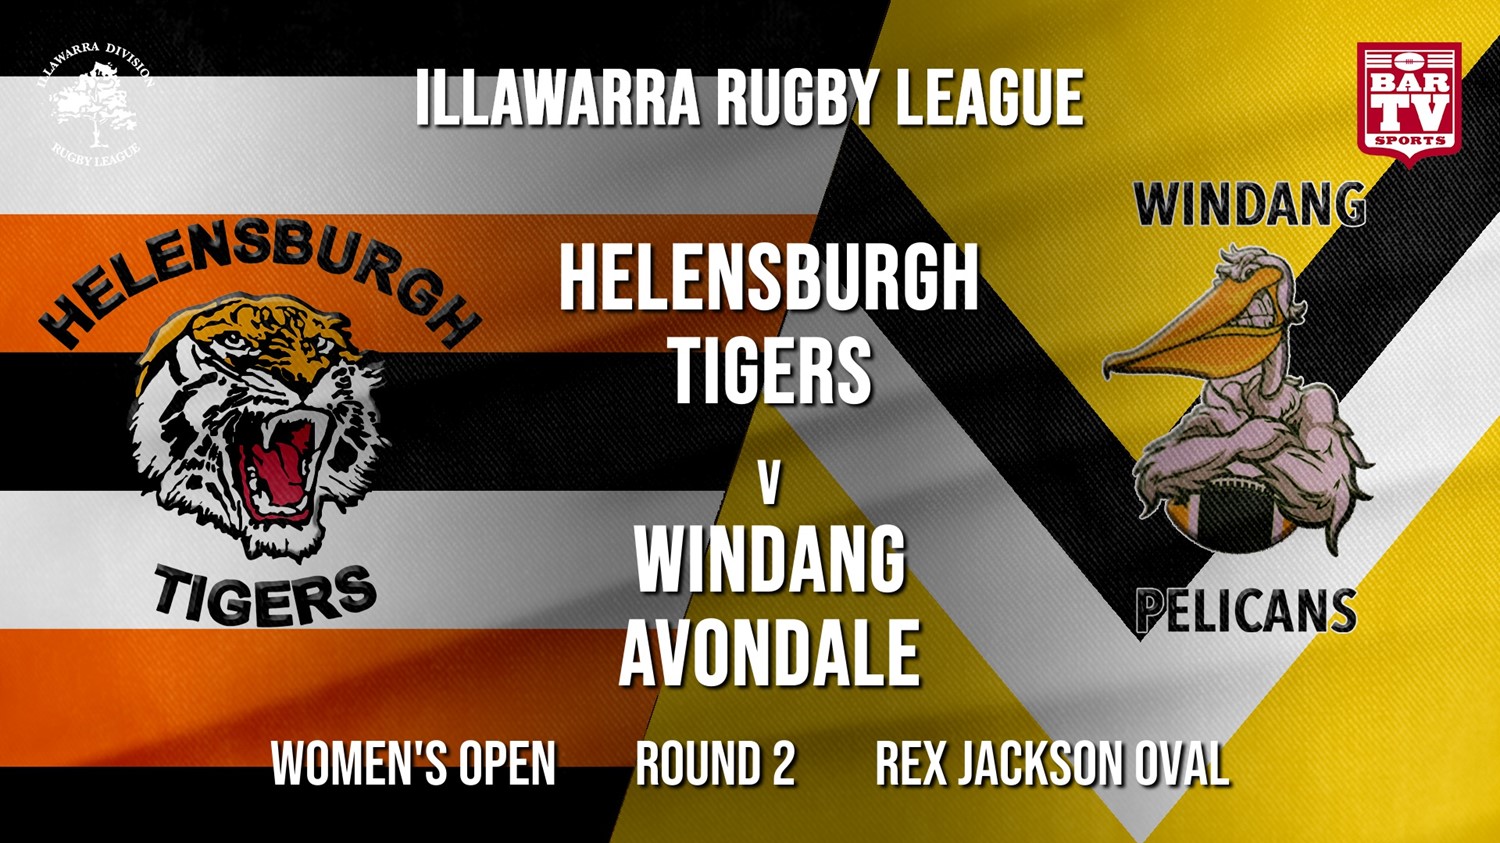 IRL Round 2 - Women's Open - Helensburgh Tigers v Windang Avondale Pelicans Minigame Slate Image